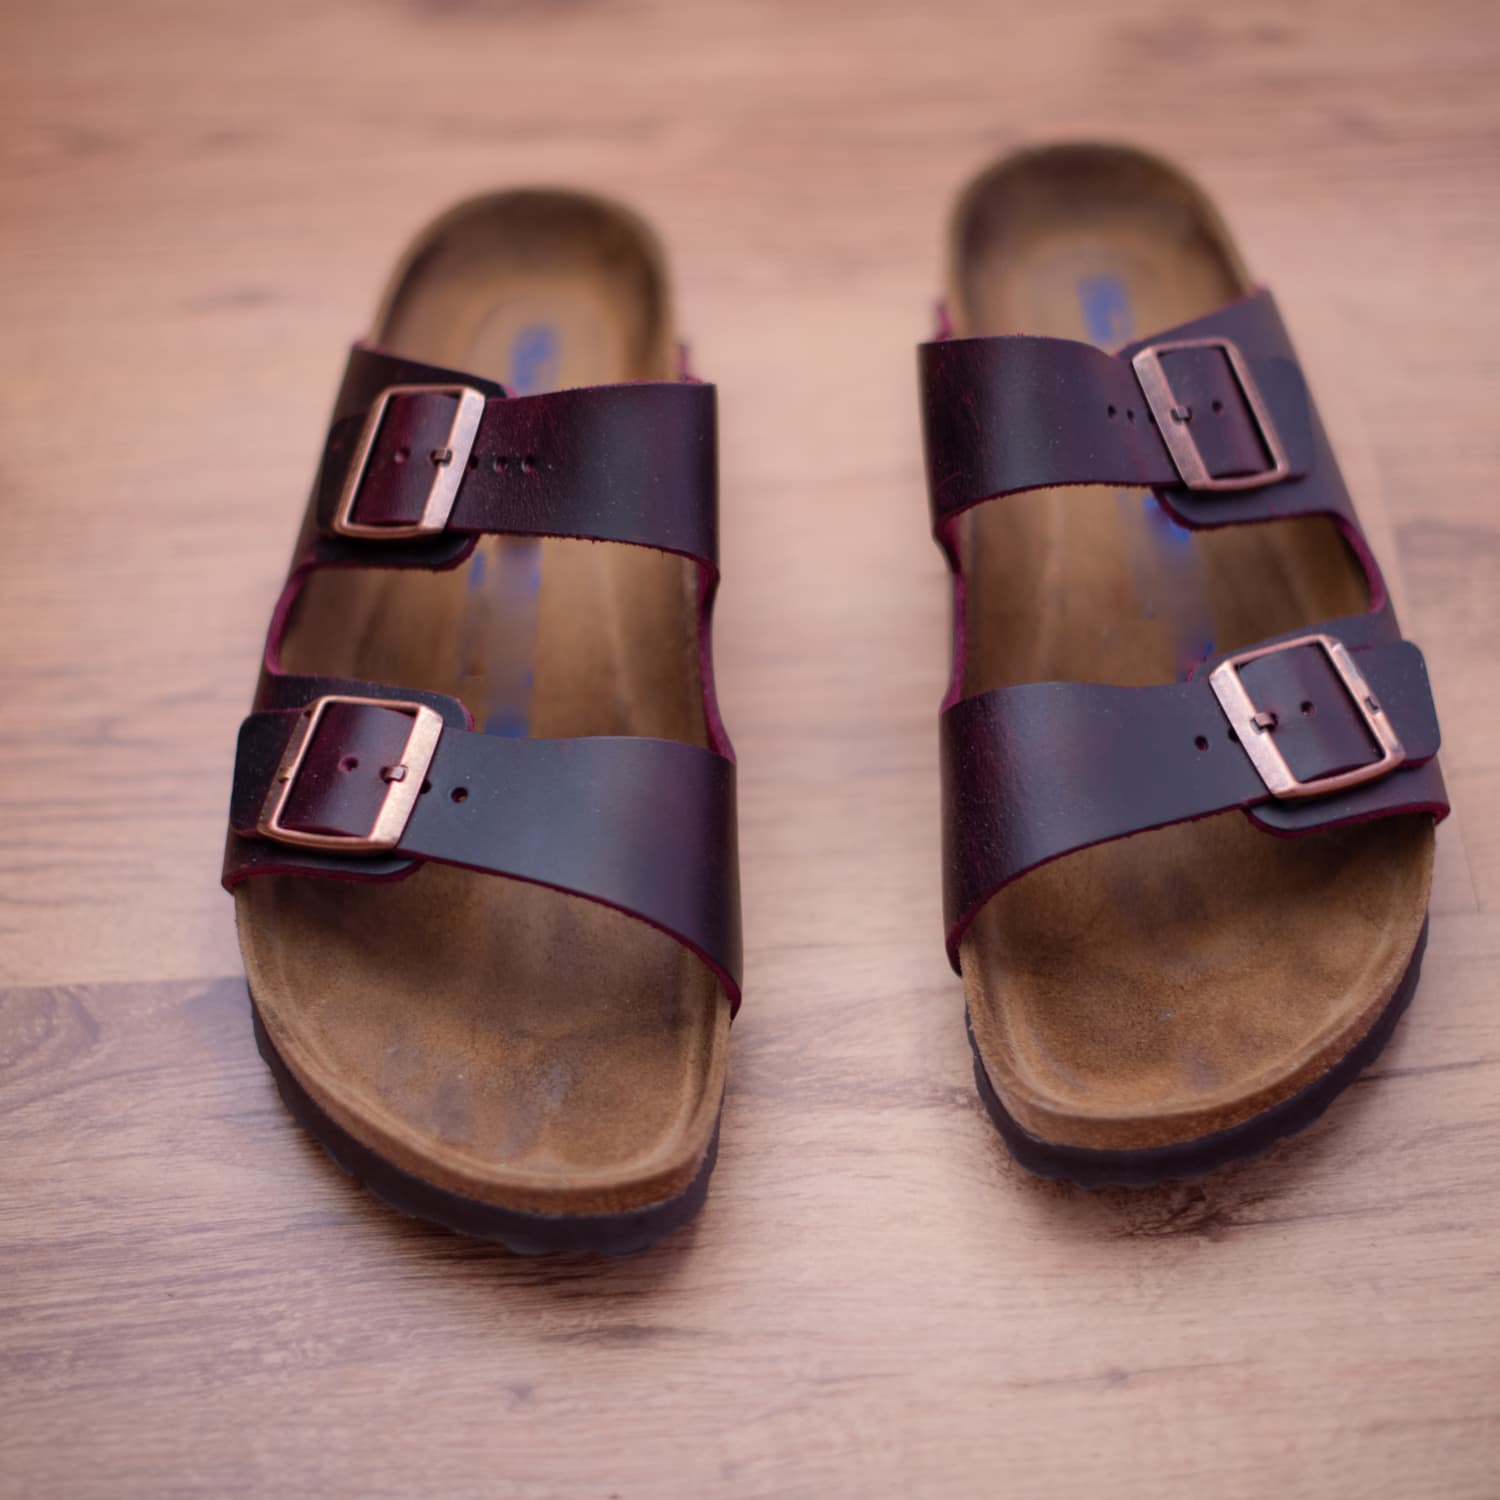 How to Clean Birkenstocks | Apartment